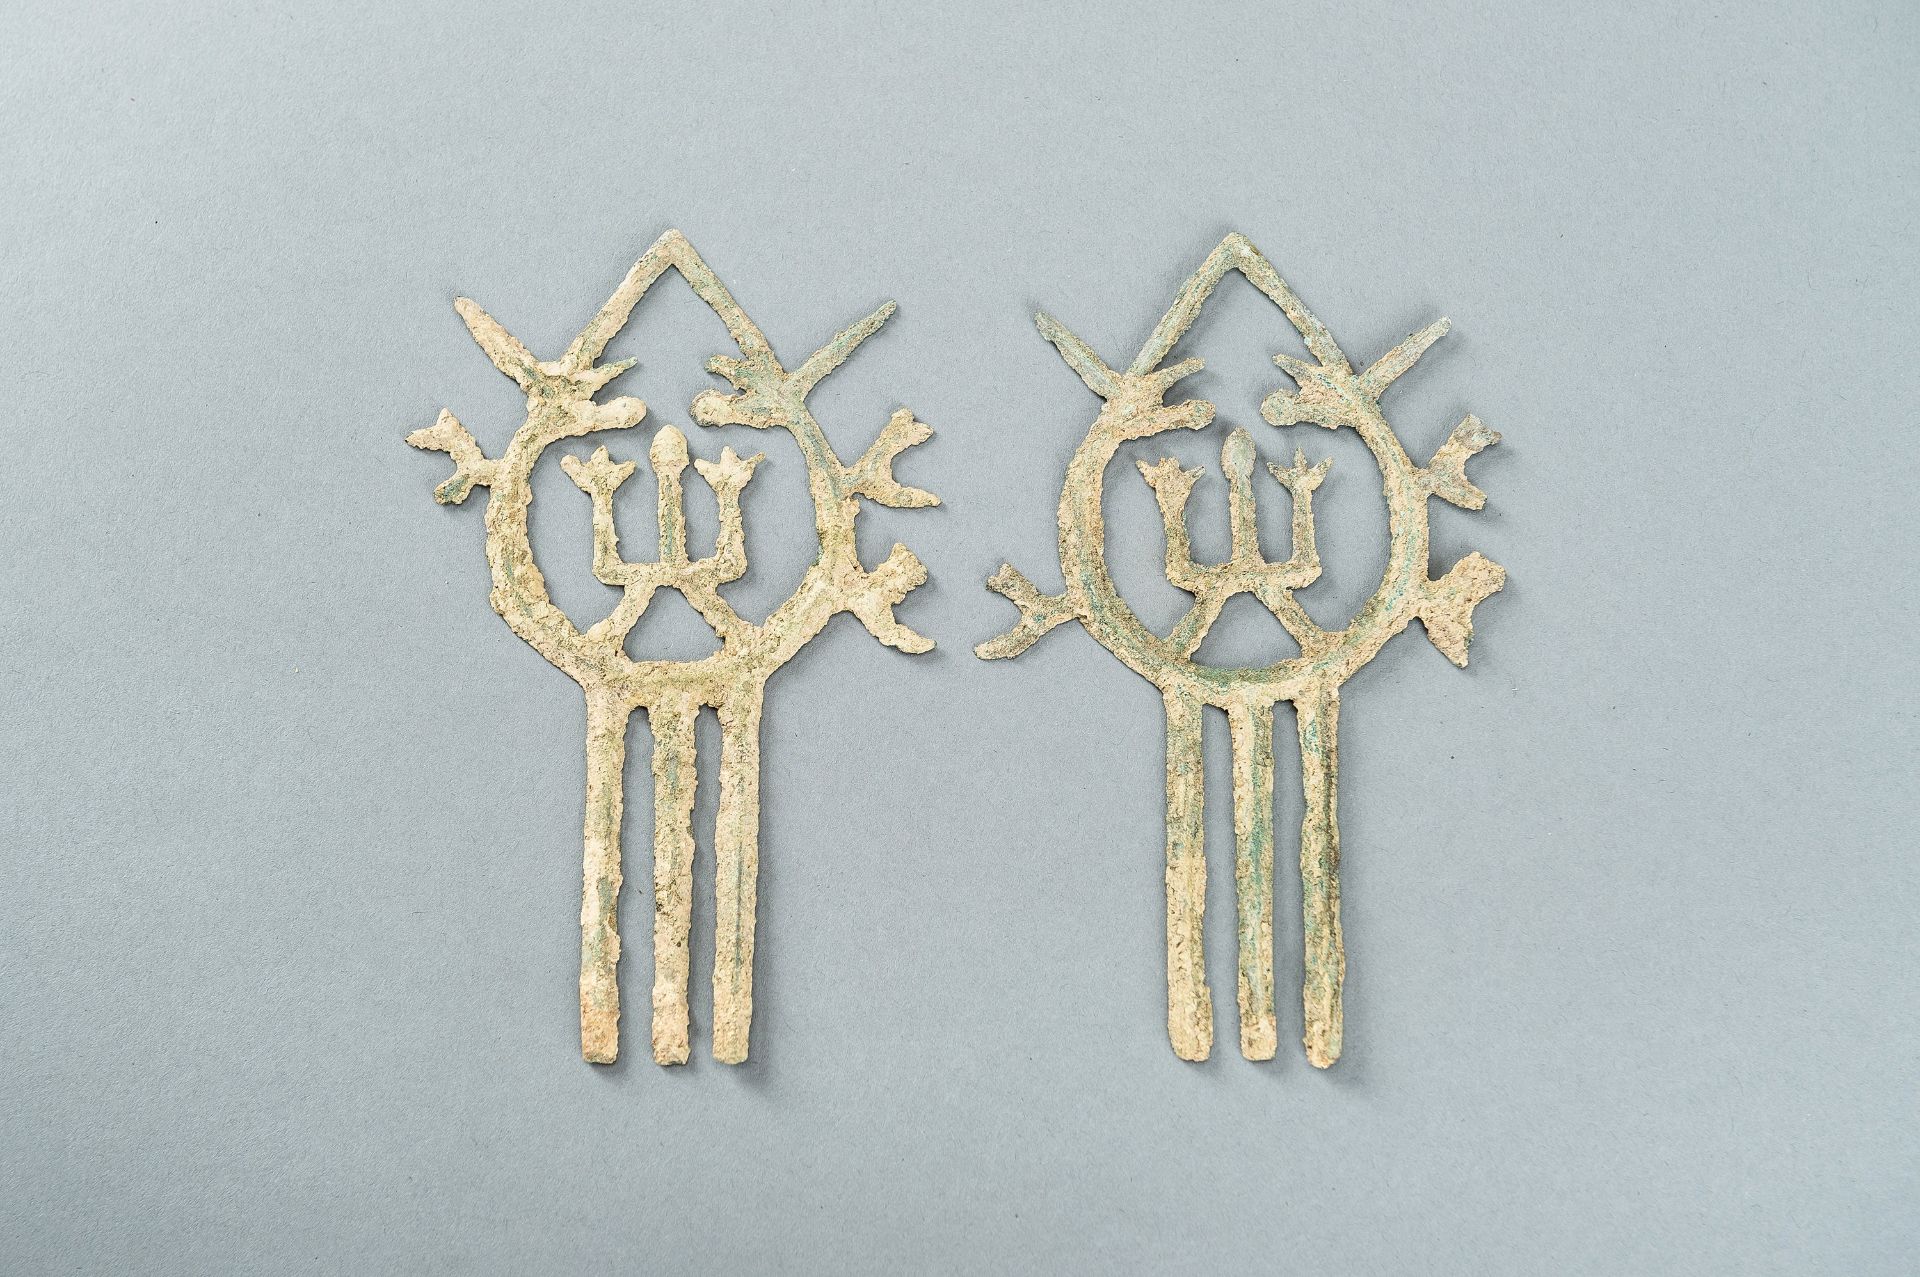 A PAIR OF BRONZE HAIRPINS, DONG SON CULTURE - Image 10 of 11